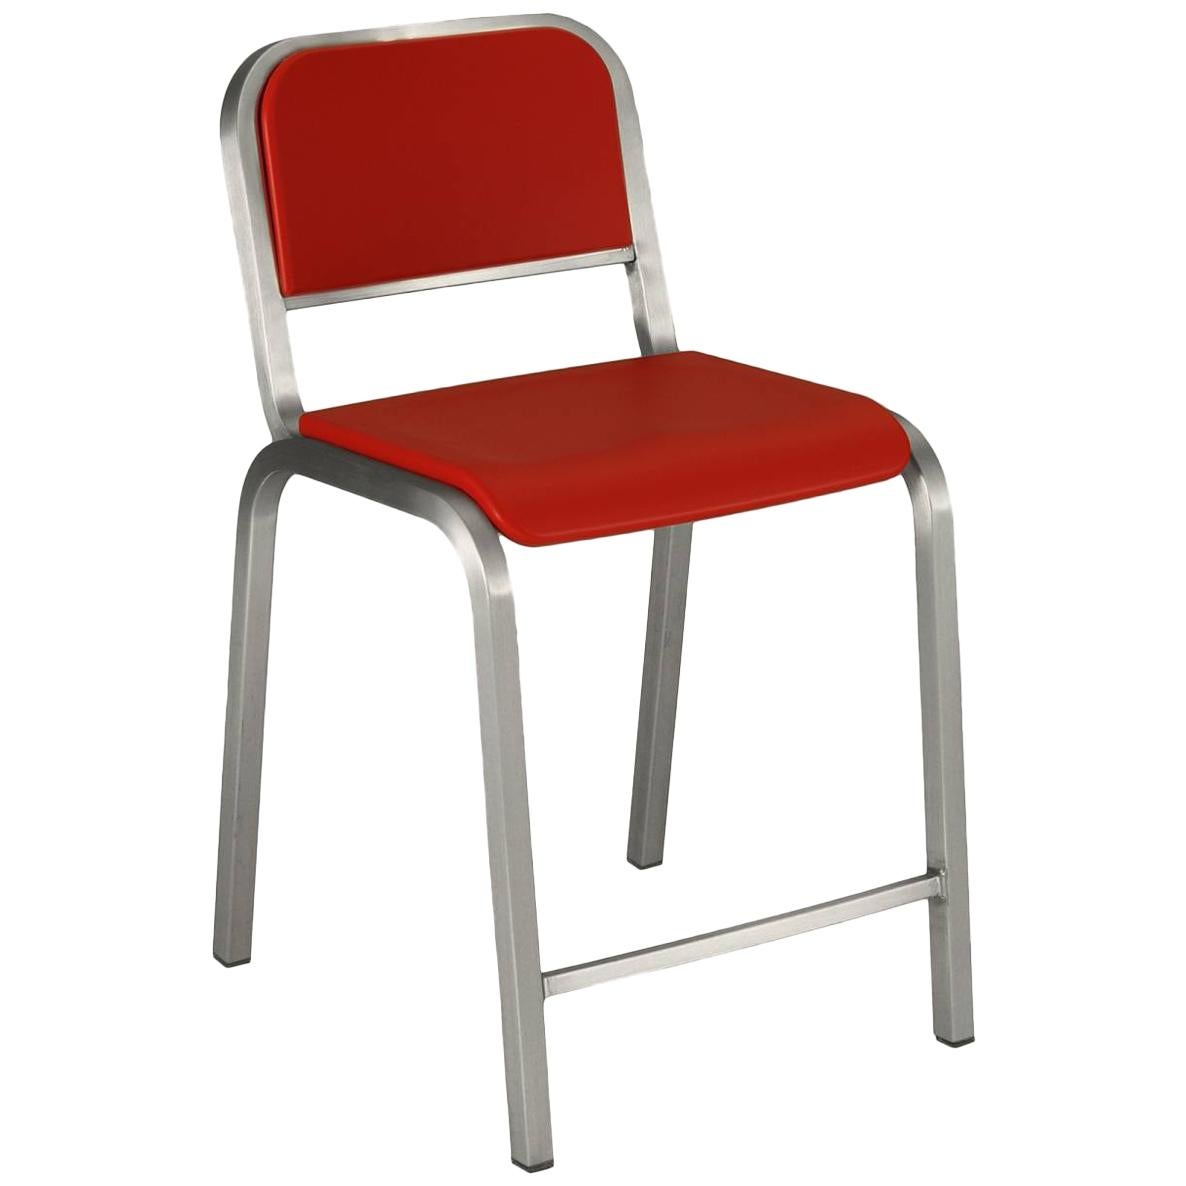 Emeco Nine-0 Counter Stool in Brushed Aluminum and Red by Ettore Sottsass